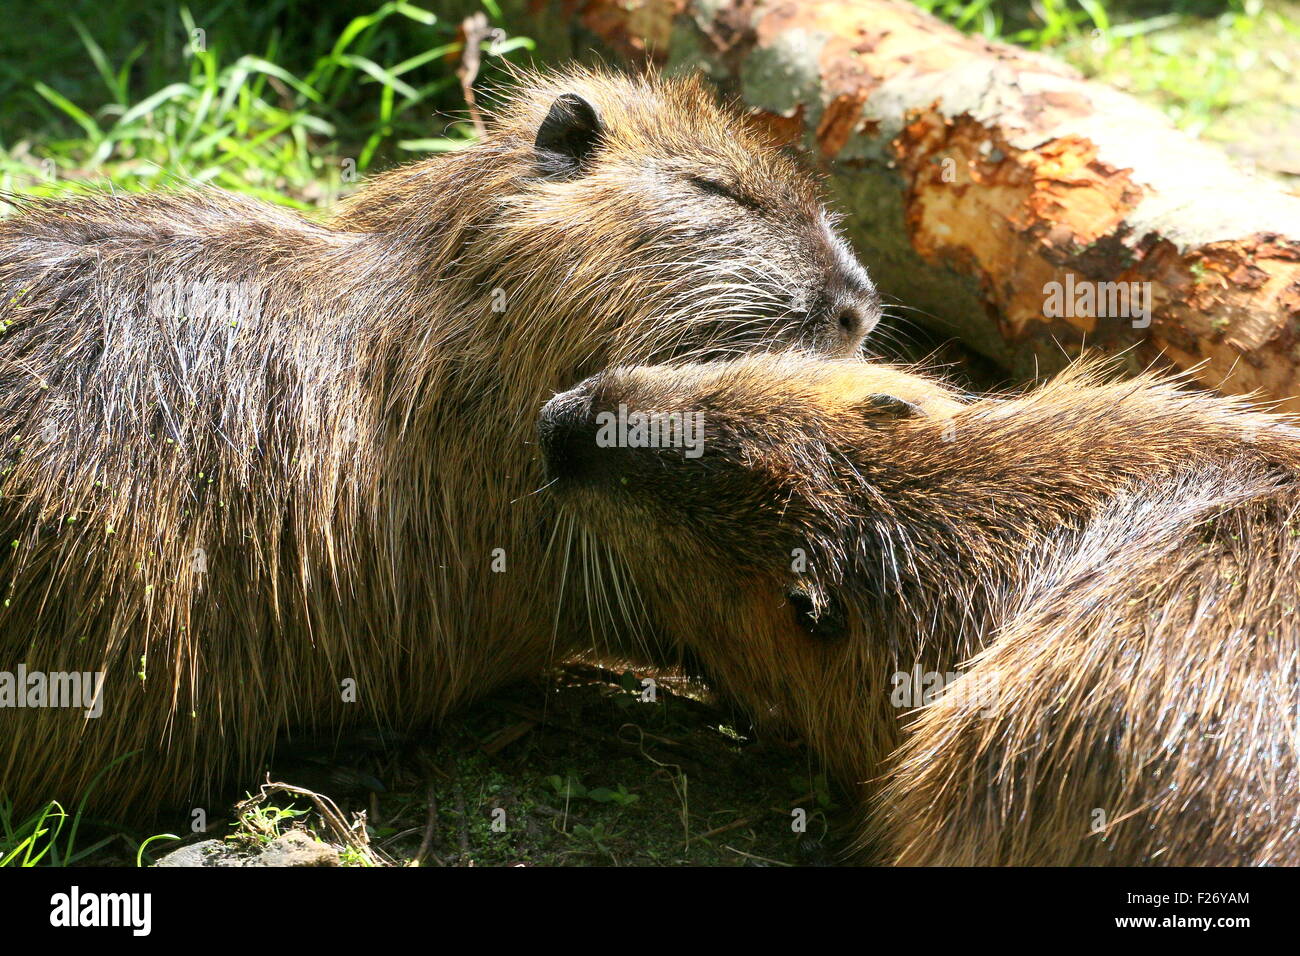 Close-up of two South American Coypus or river rats (Myocastor coypus) cleaning each other's fur Stock Photo